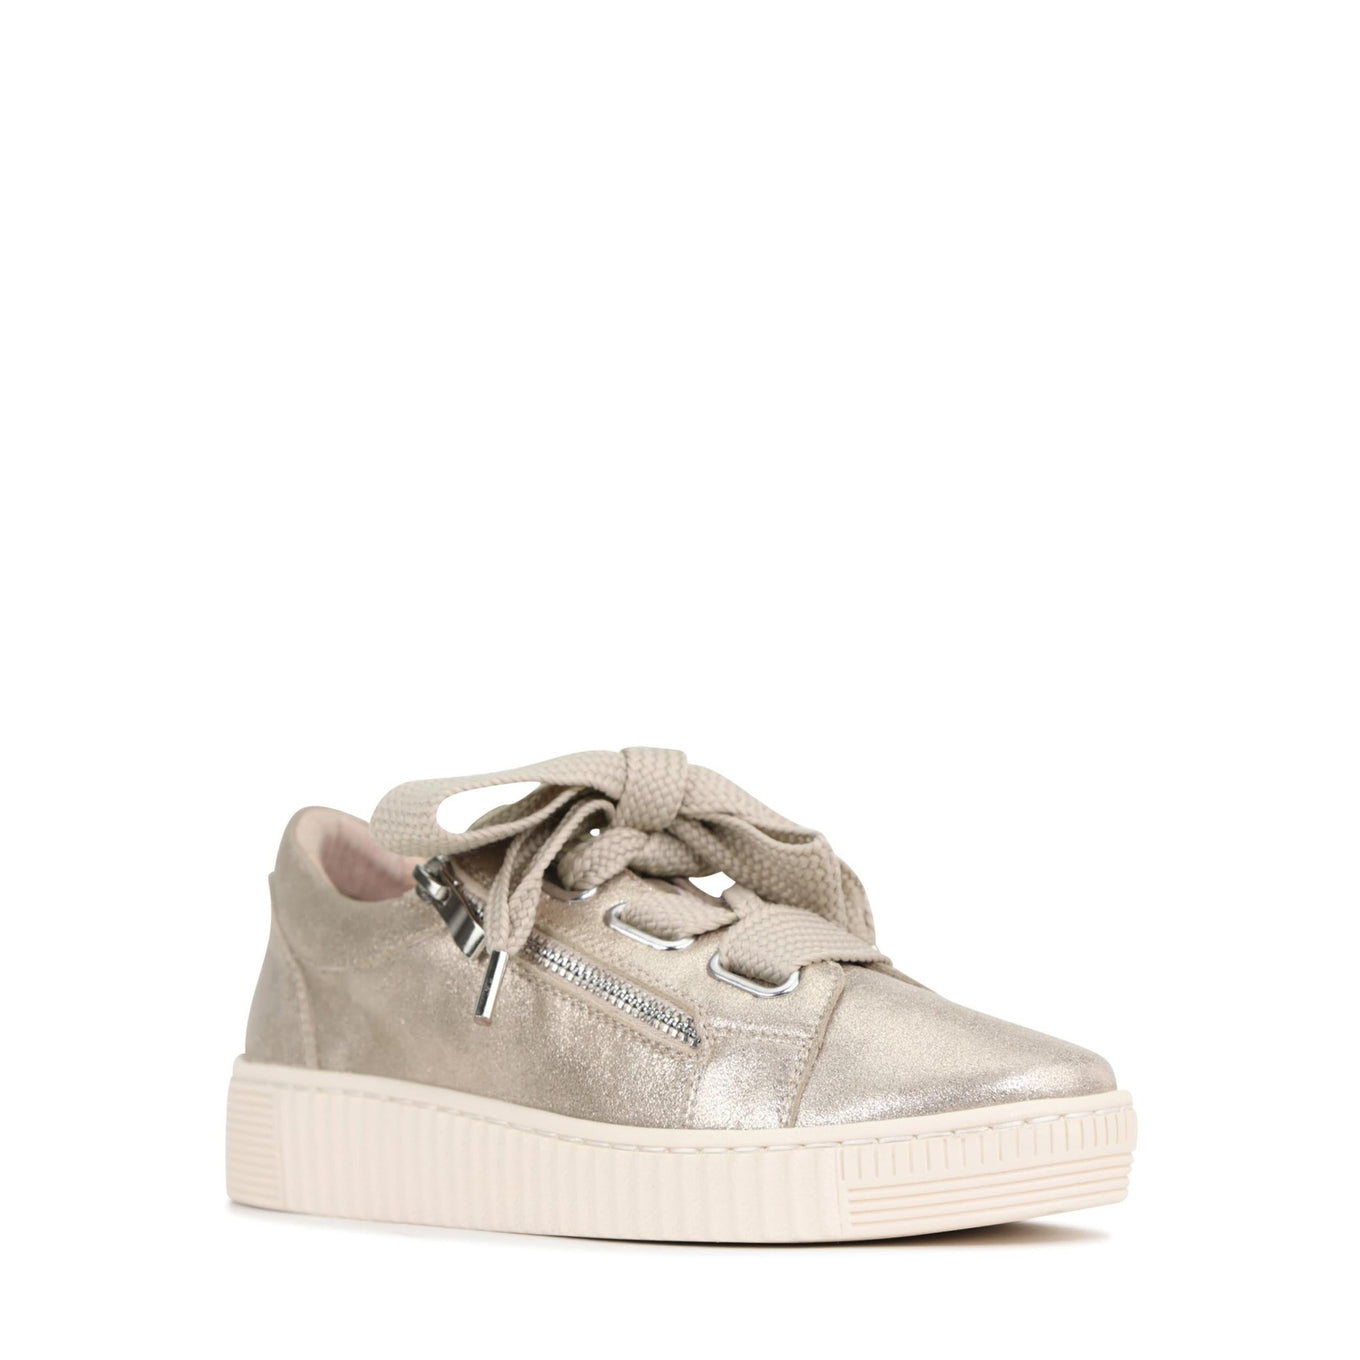 EOS JOVI CHAMPAGNE - Women sneakers - Collective Shoes 